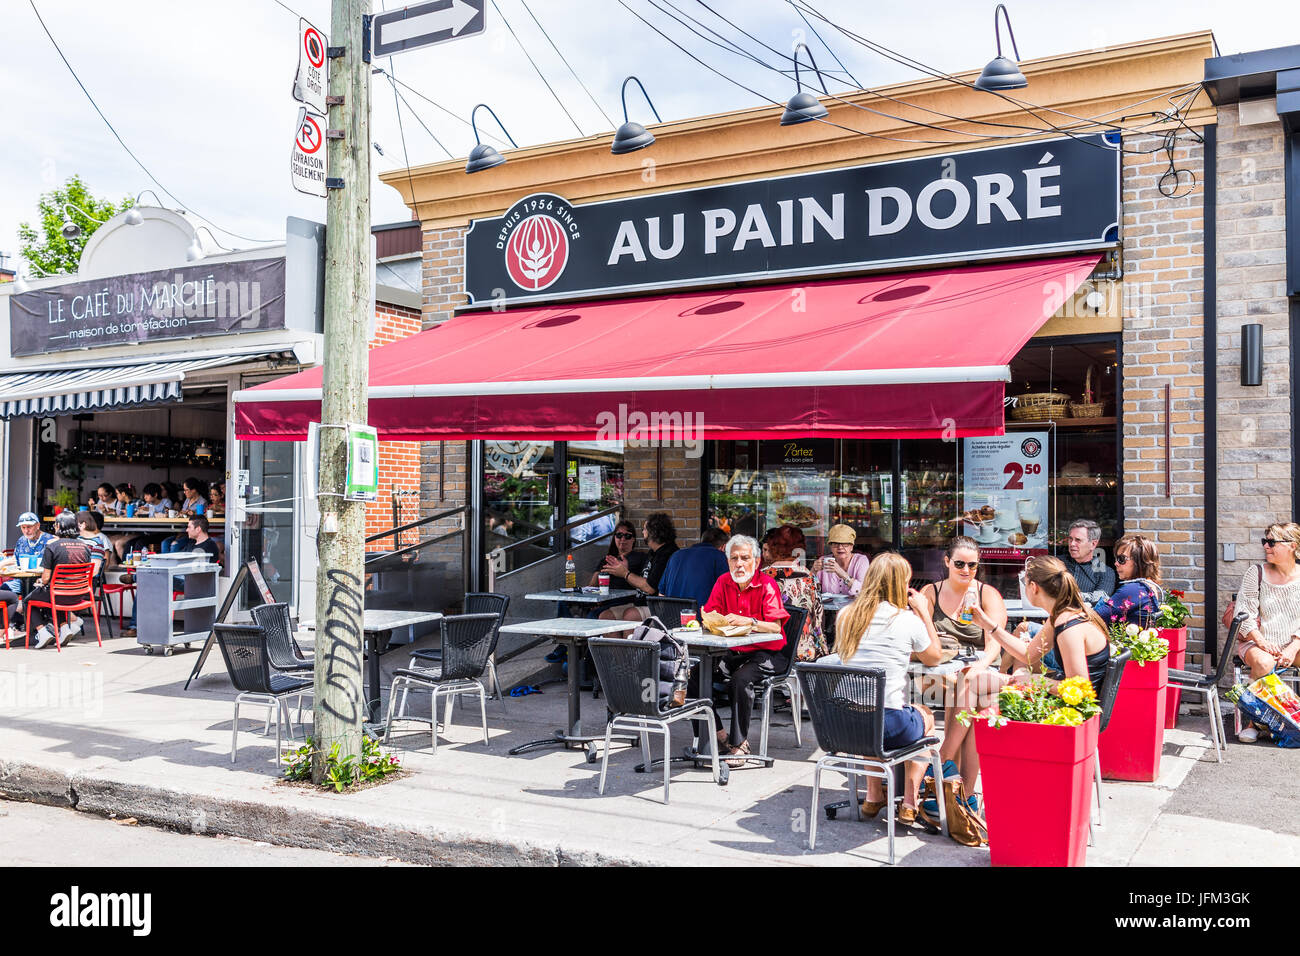 Montreal, Canada - May 28, 2017: Au Pain Dore Restaurant outside seating area with people sitting at tables at Jean-Talon farmers market Stock Photo